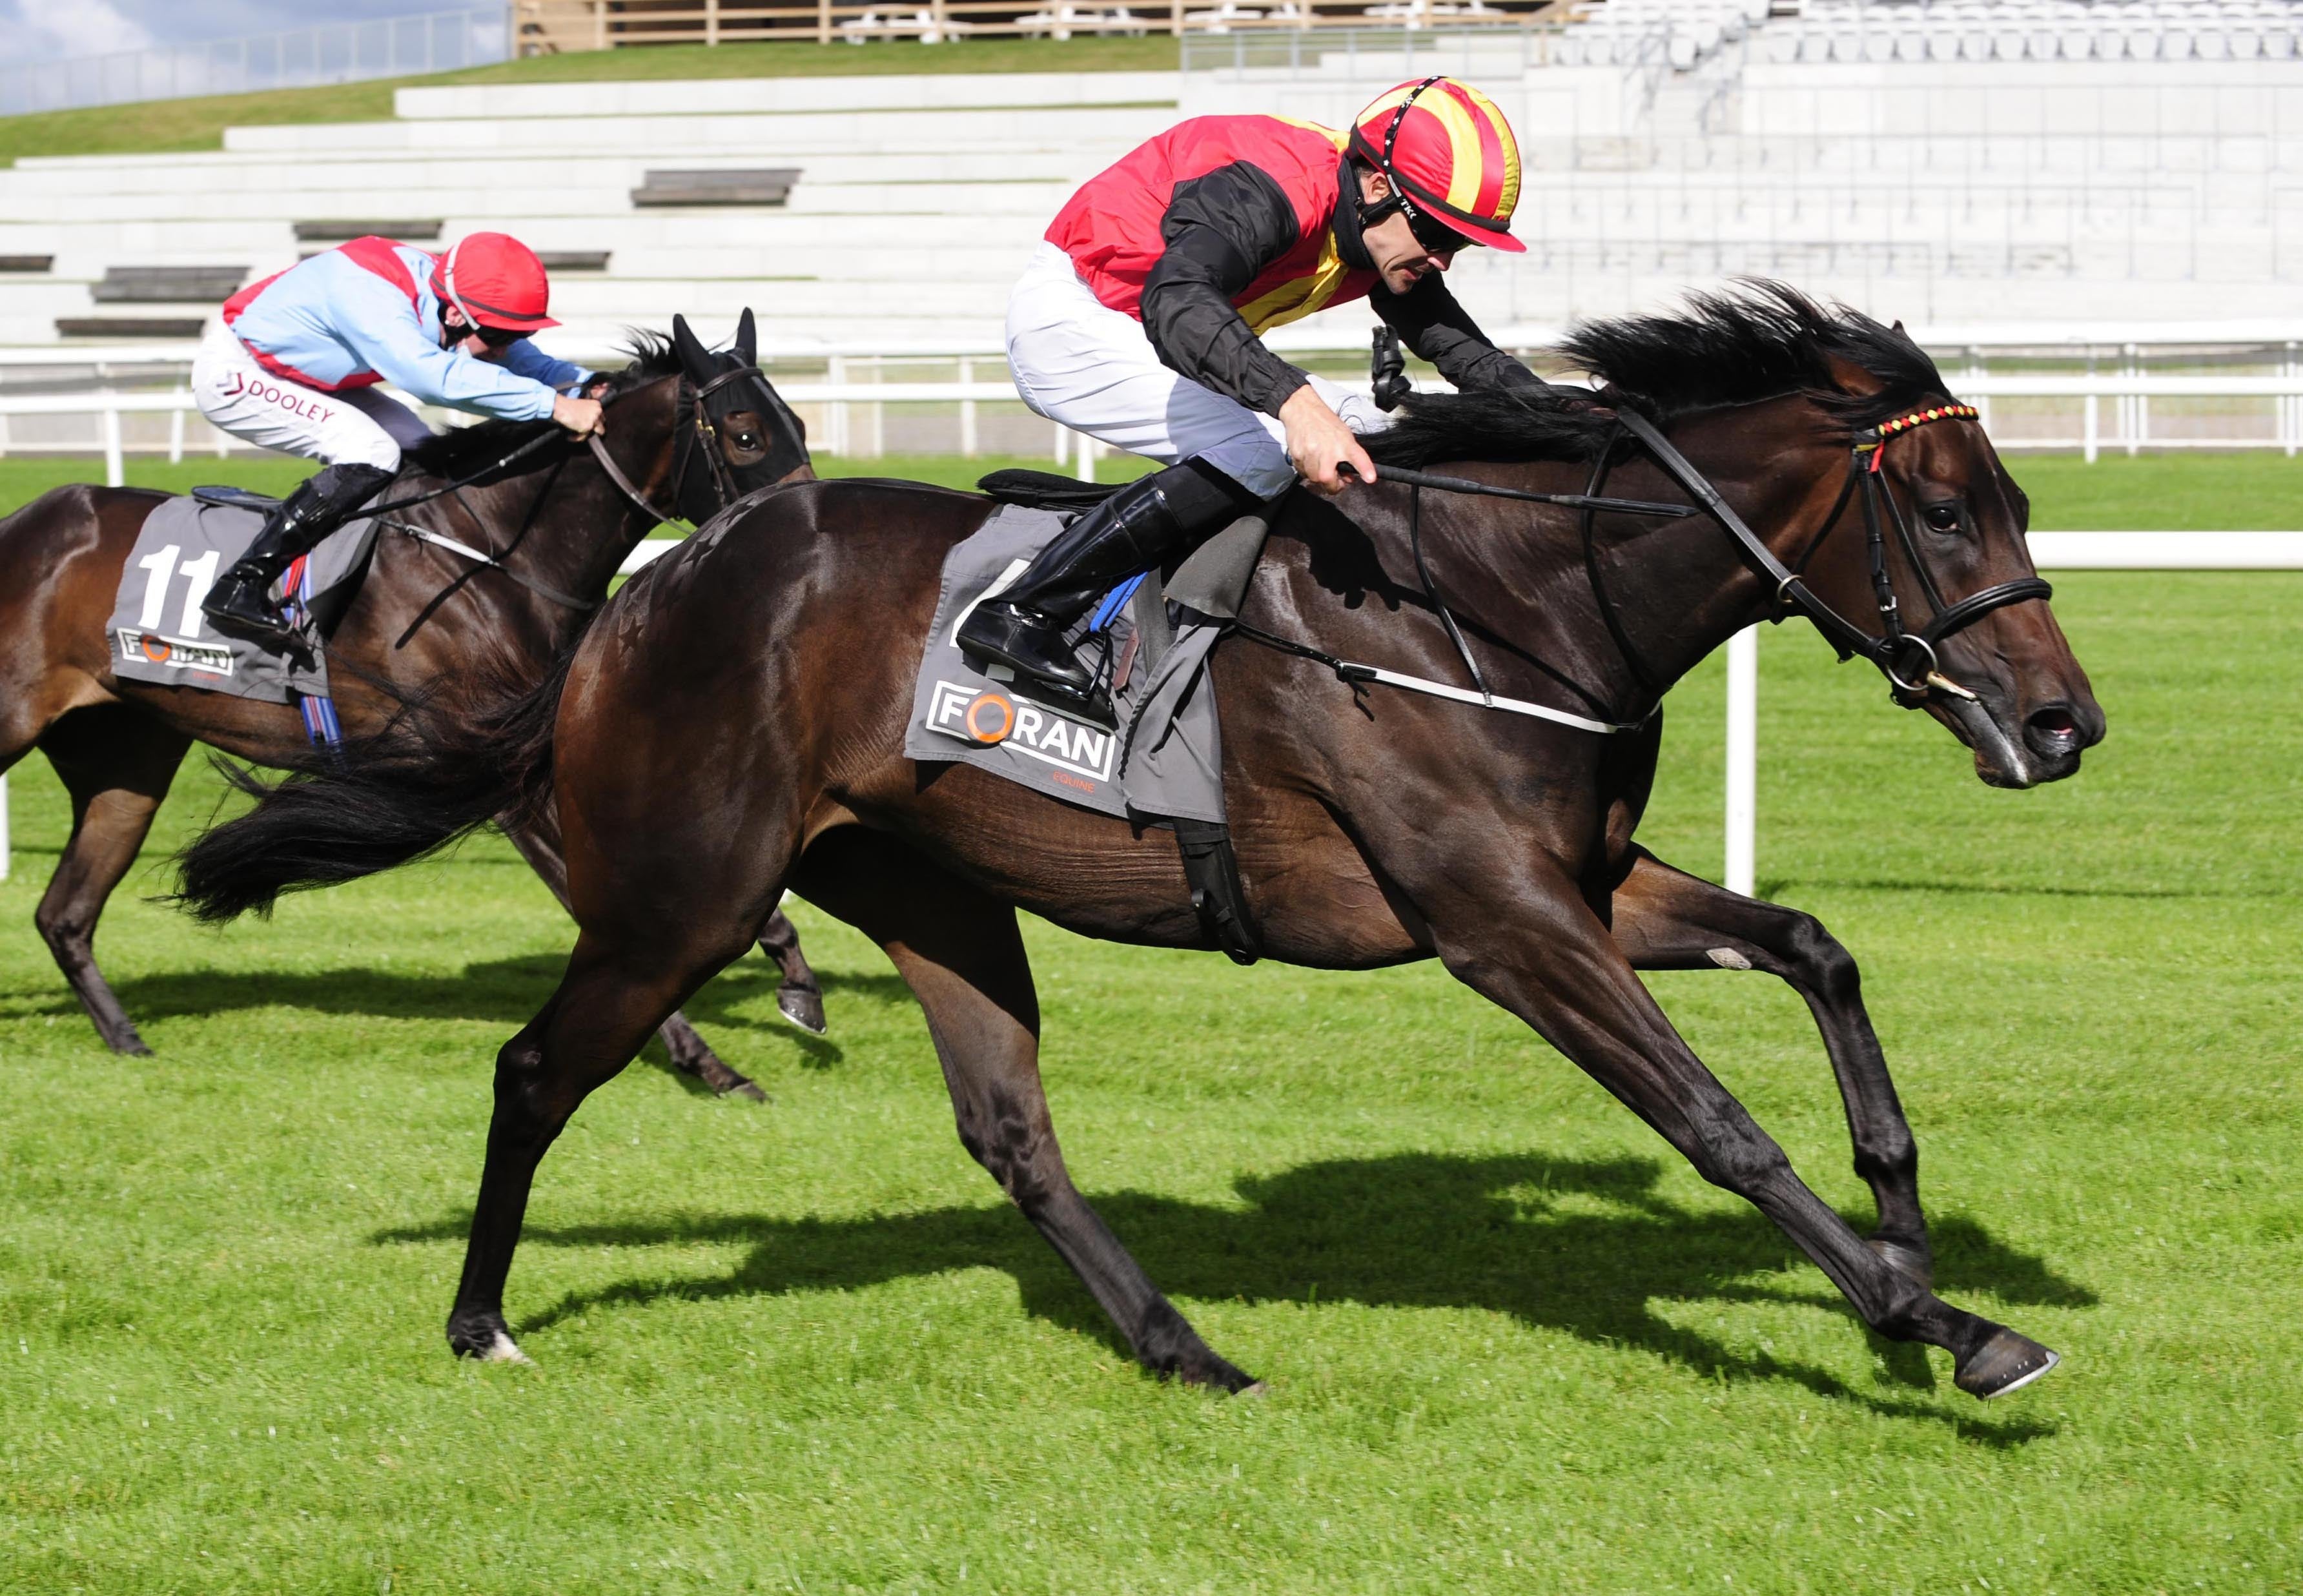 Belle Image winning at the Curragh last year